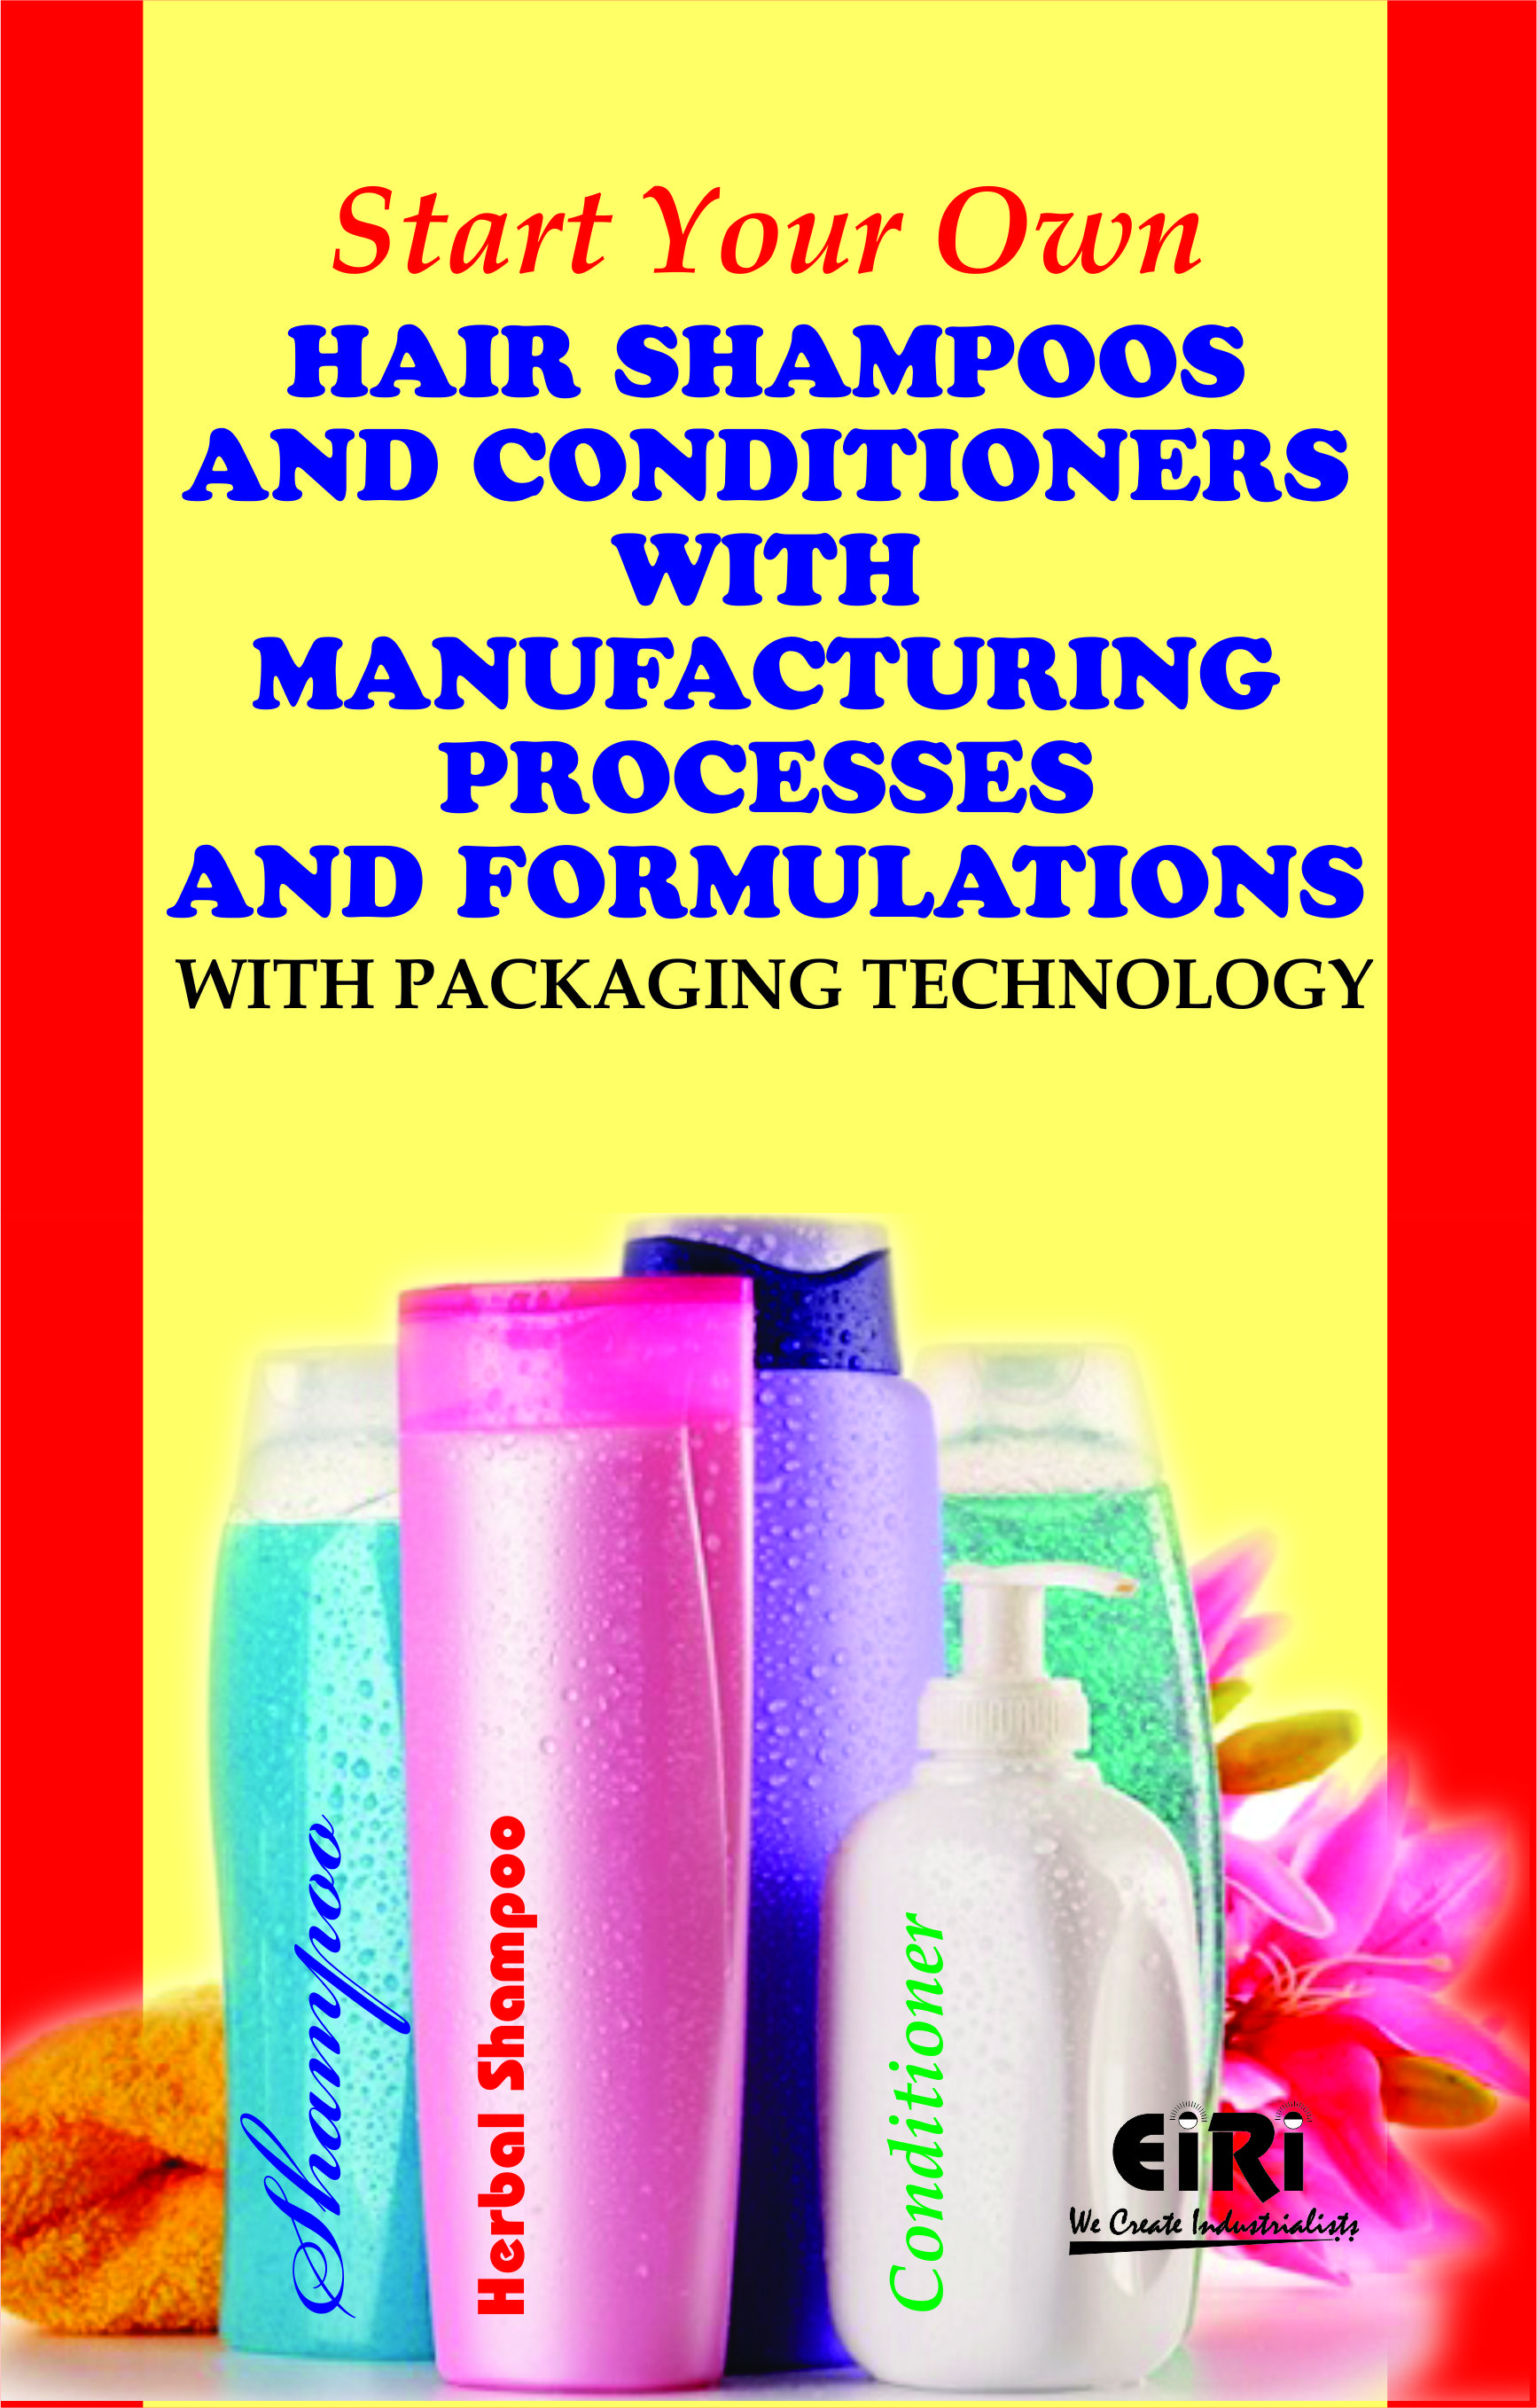 Handbook and Formulations on Hair Shampoos and